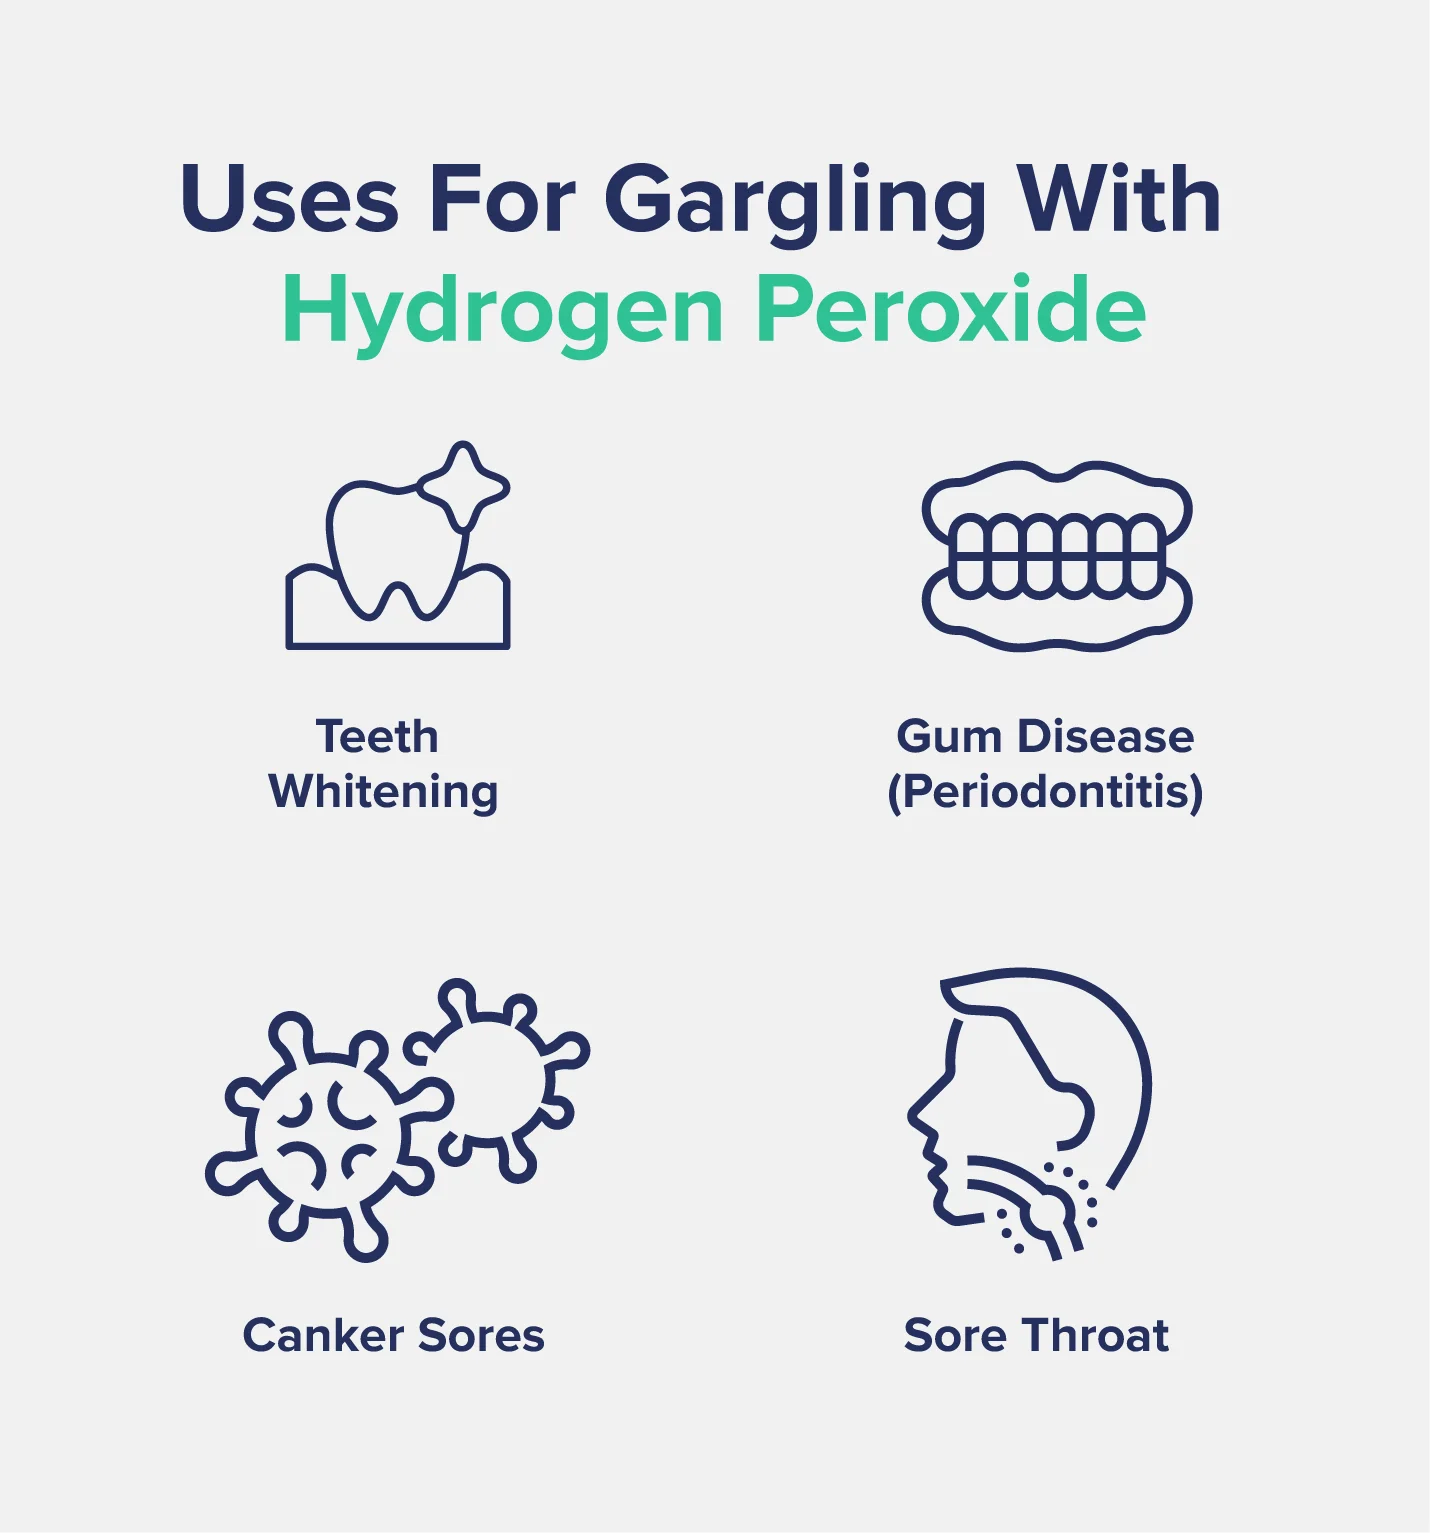 Uses For Gargling With Hydrogen Peroxide